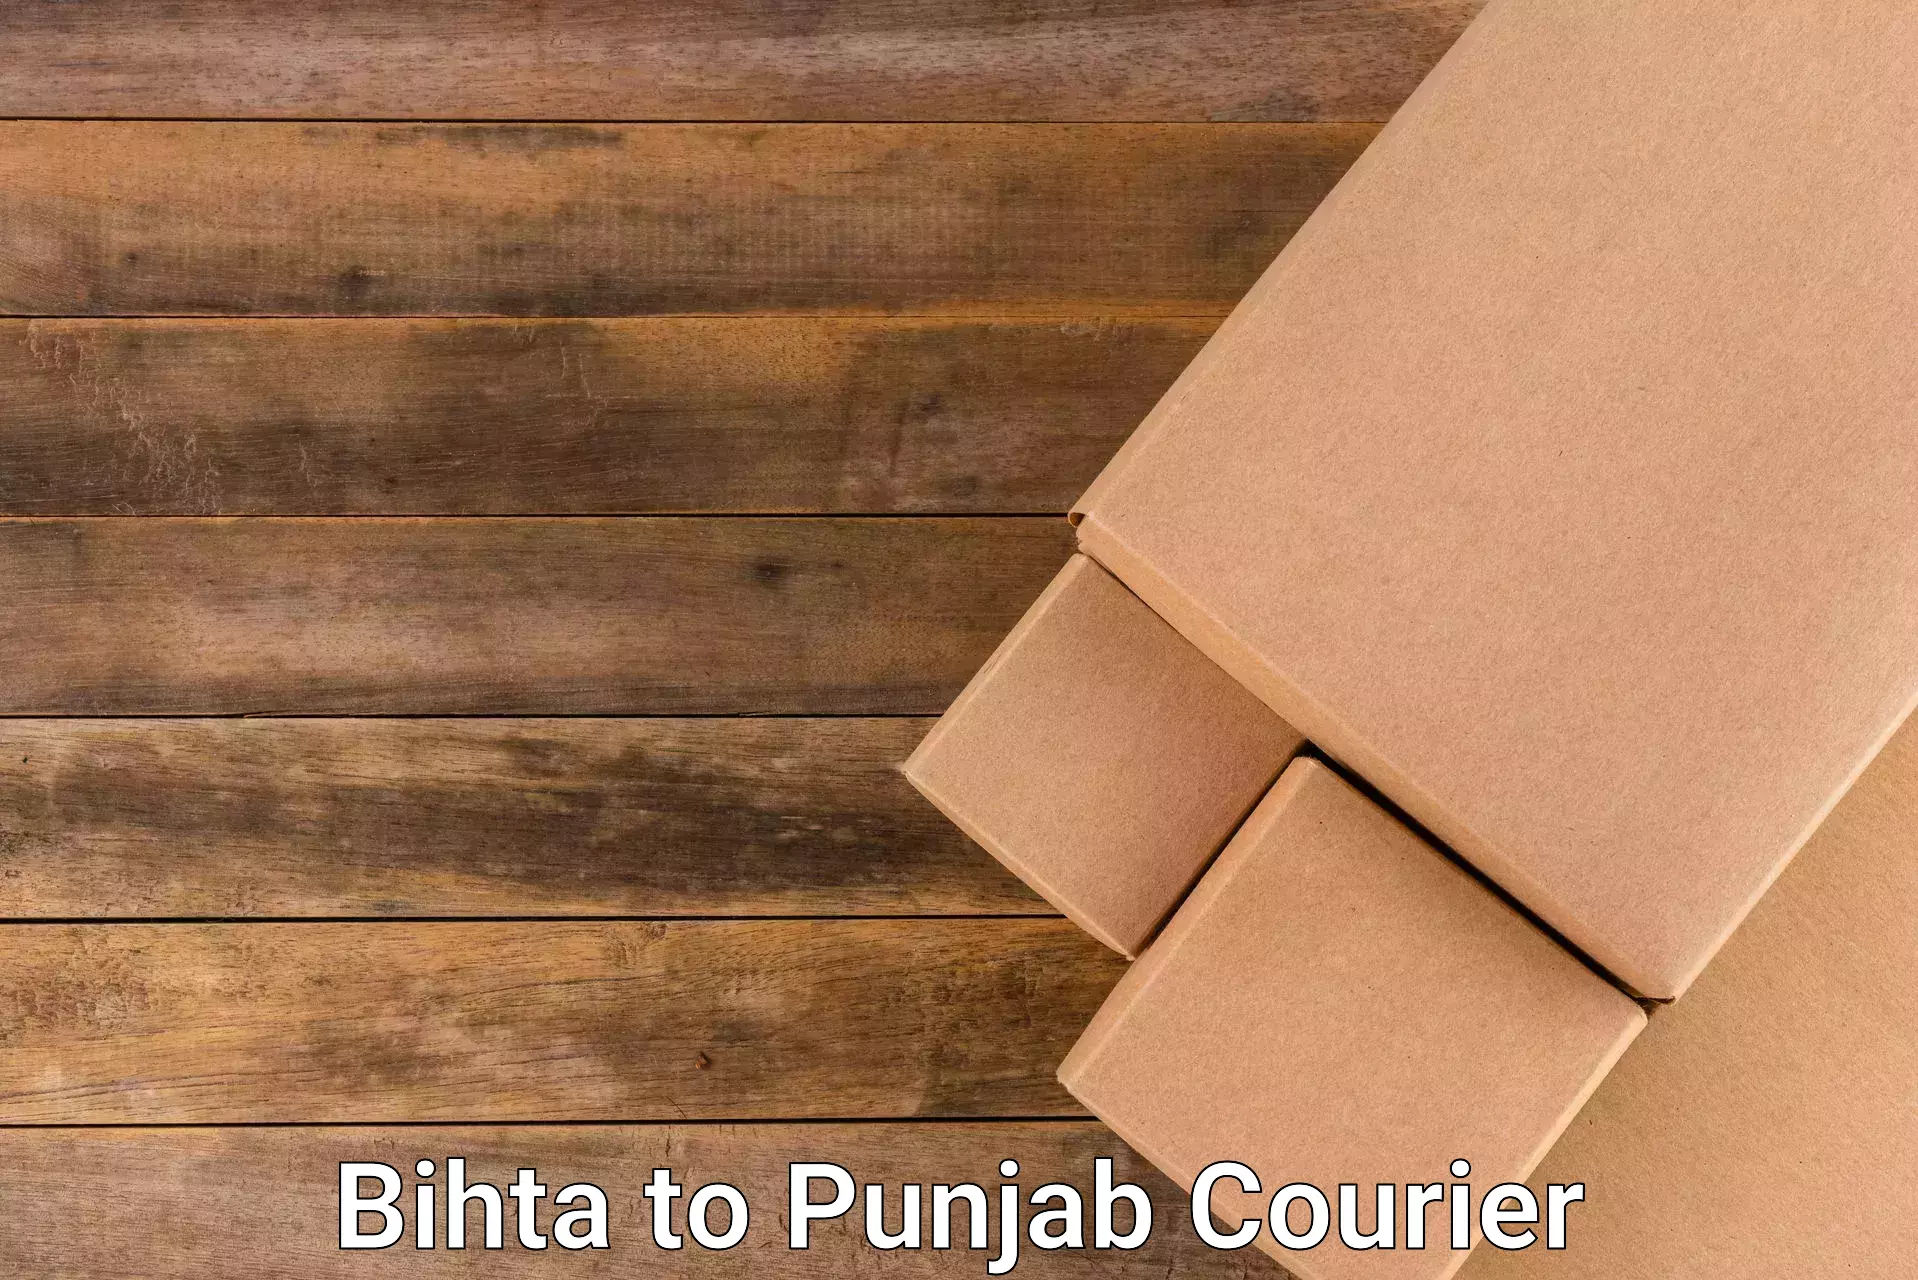 State-of-the-art courier technology Bihta to Mohali